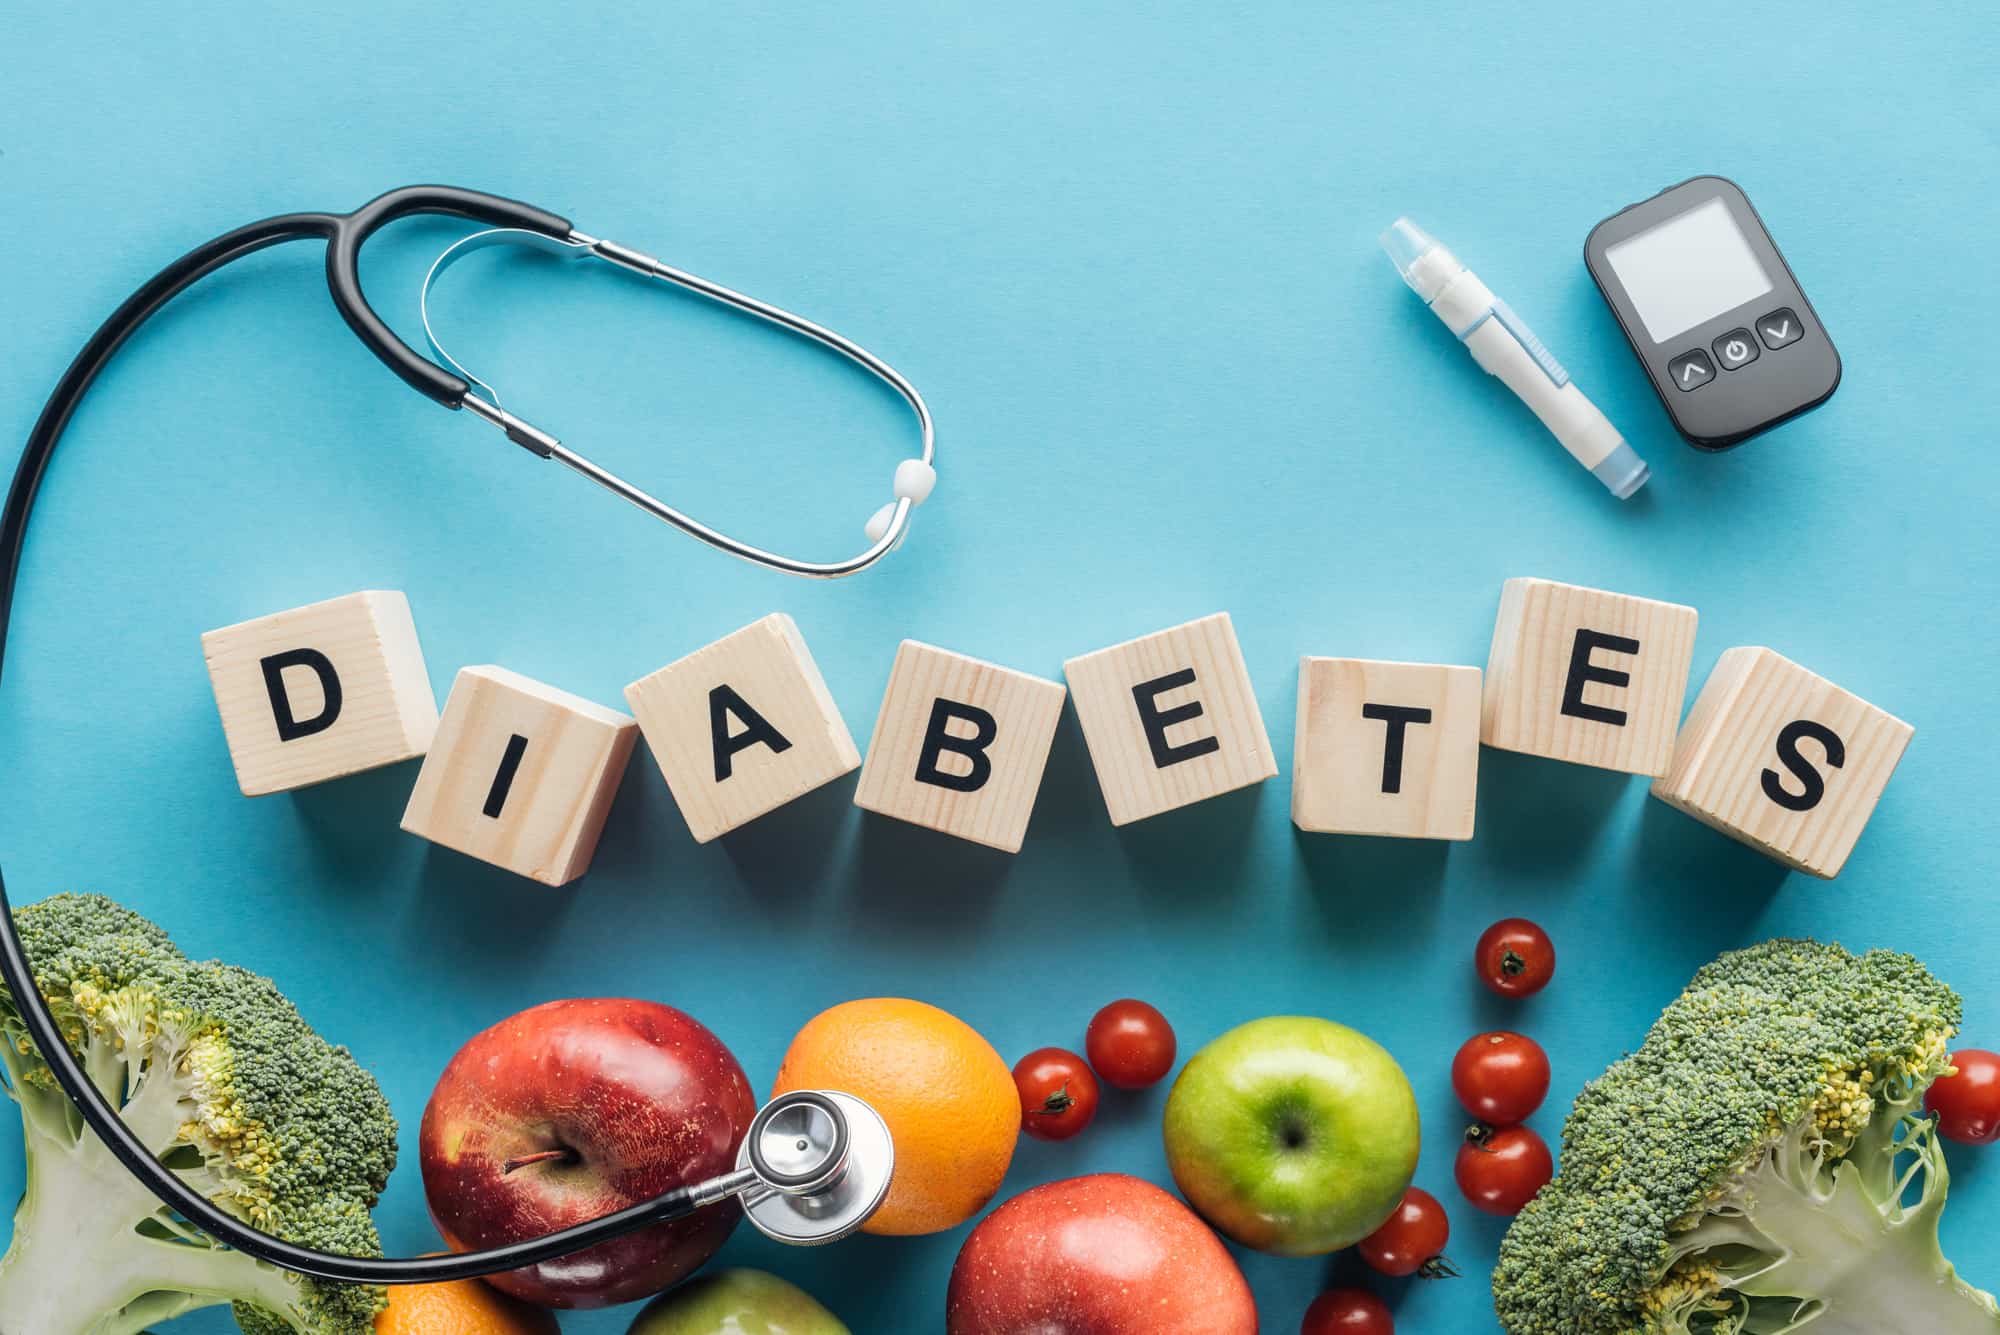 research topics related to diabetes